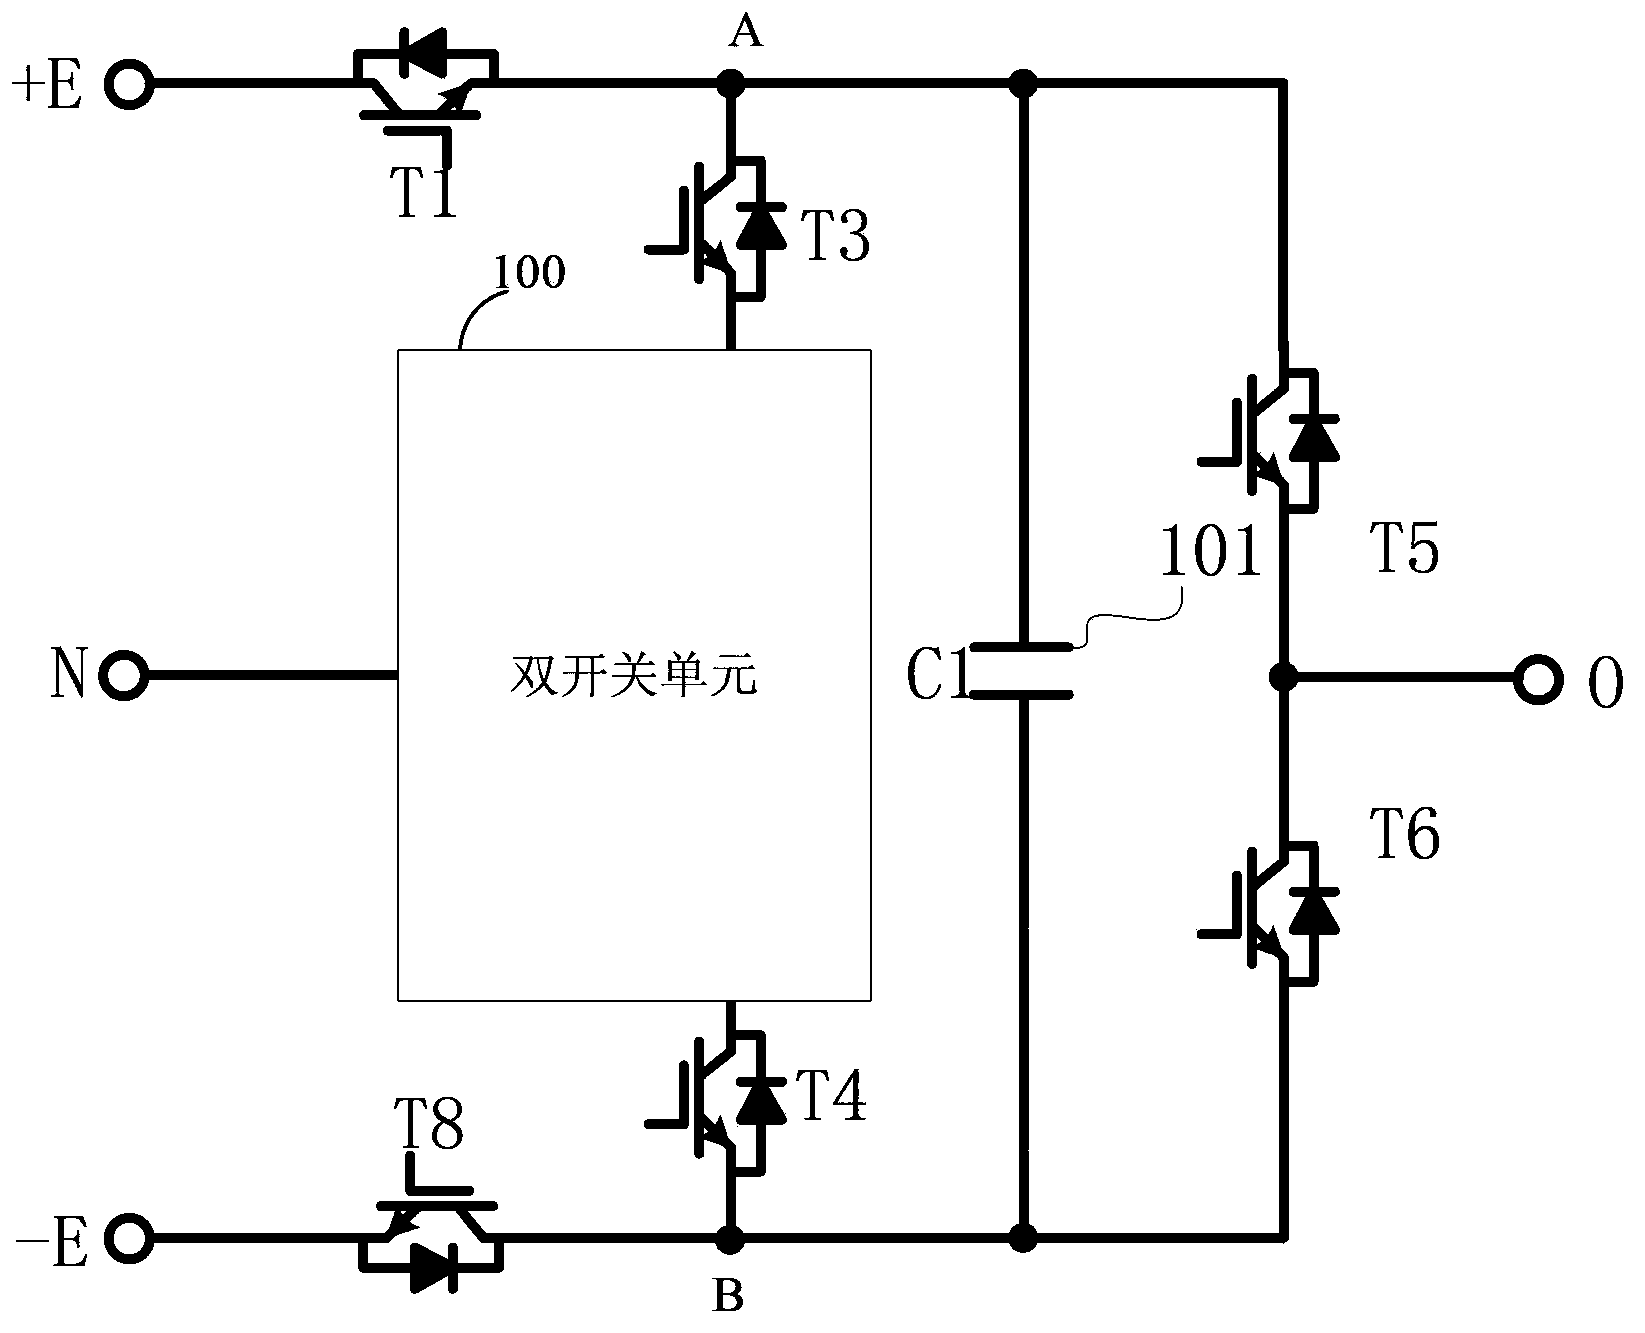 Single-phase five-level topology and inverter